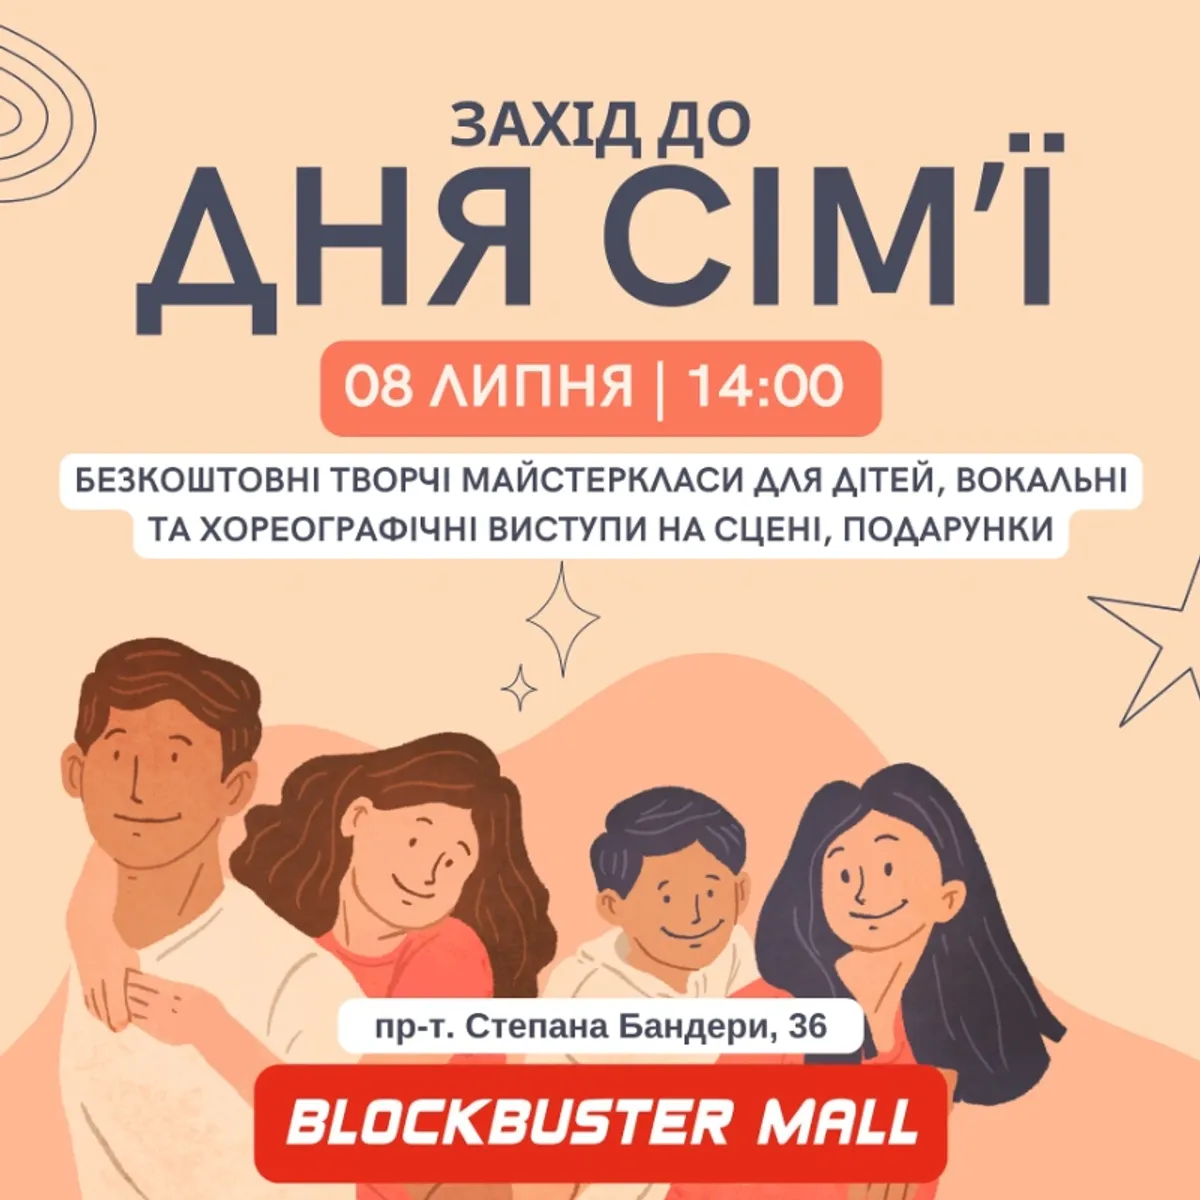 Family Day event in BLOCKBUSTER MALL